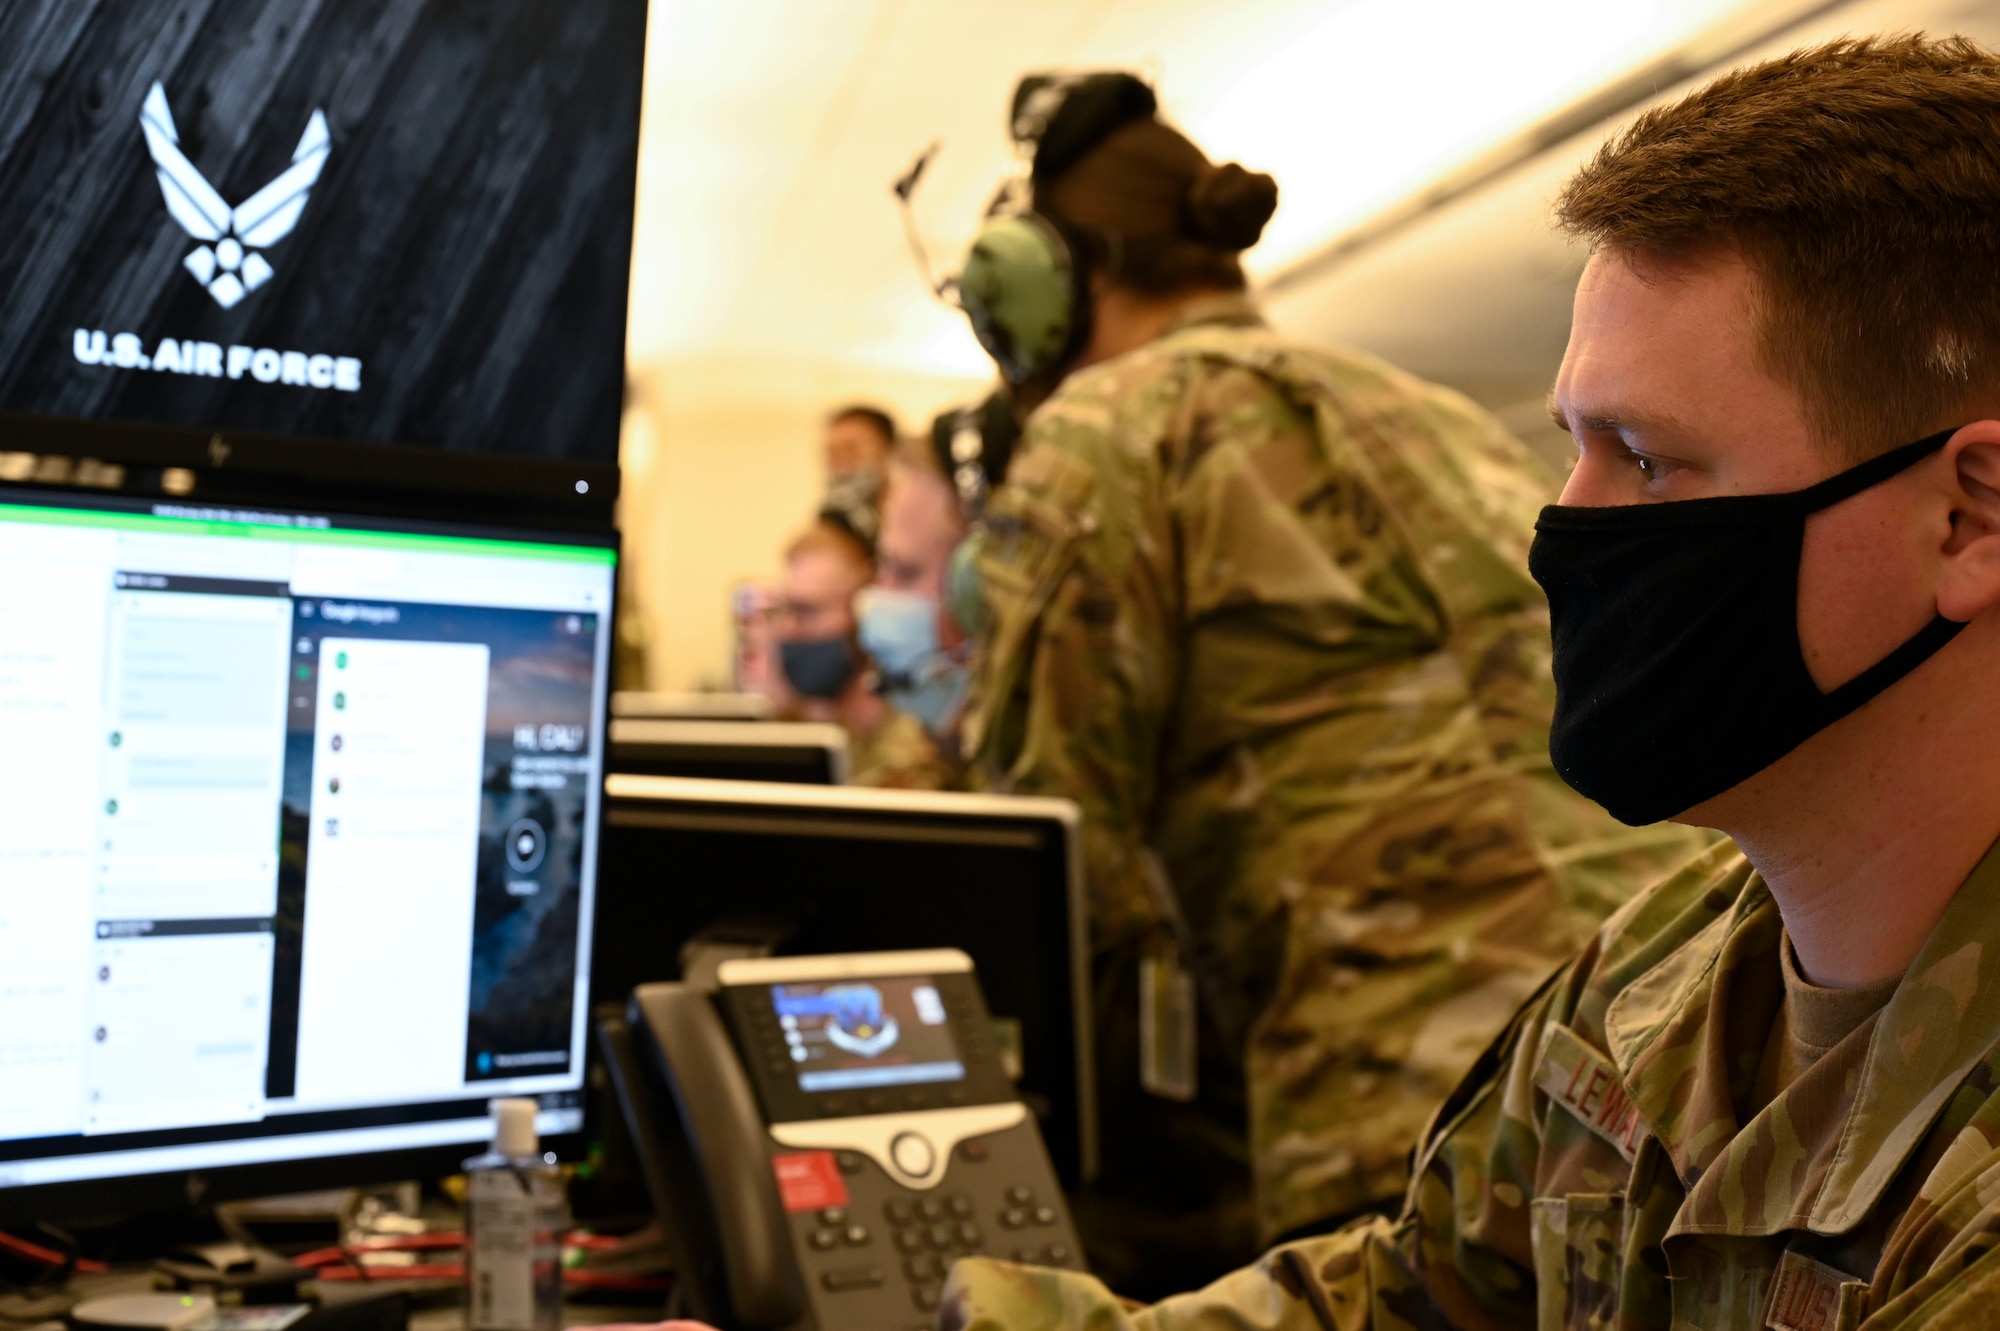 A member from the 727th Expeditionary Air Control Squadron (EACS) “Kingpin” works at his station, at Shaw Air Force Base, South Carolina, April 21, 2021. Kingpin is a tactical command and control unit that serves as the lead control and reporting center and directly provides the Combined Air Operations Center with a common air picture, enabling the completion of air operations across the US Central Command area of responsibility. The 727th EACS repositioned from Al Dhafra Air Base and began full operations April 20 from Shaw AFB. (U.S. Air Force photo by Tech. Sgt. E’Lysia A. Wray)